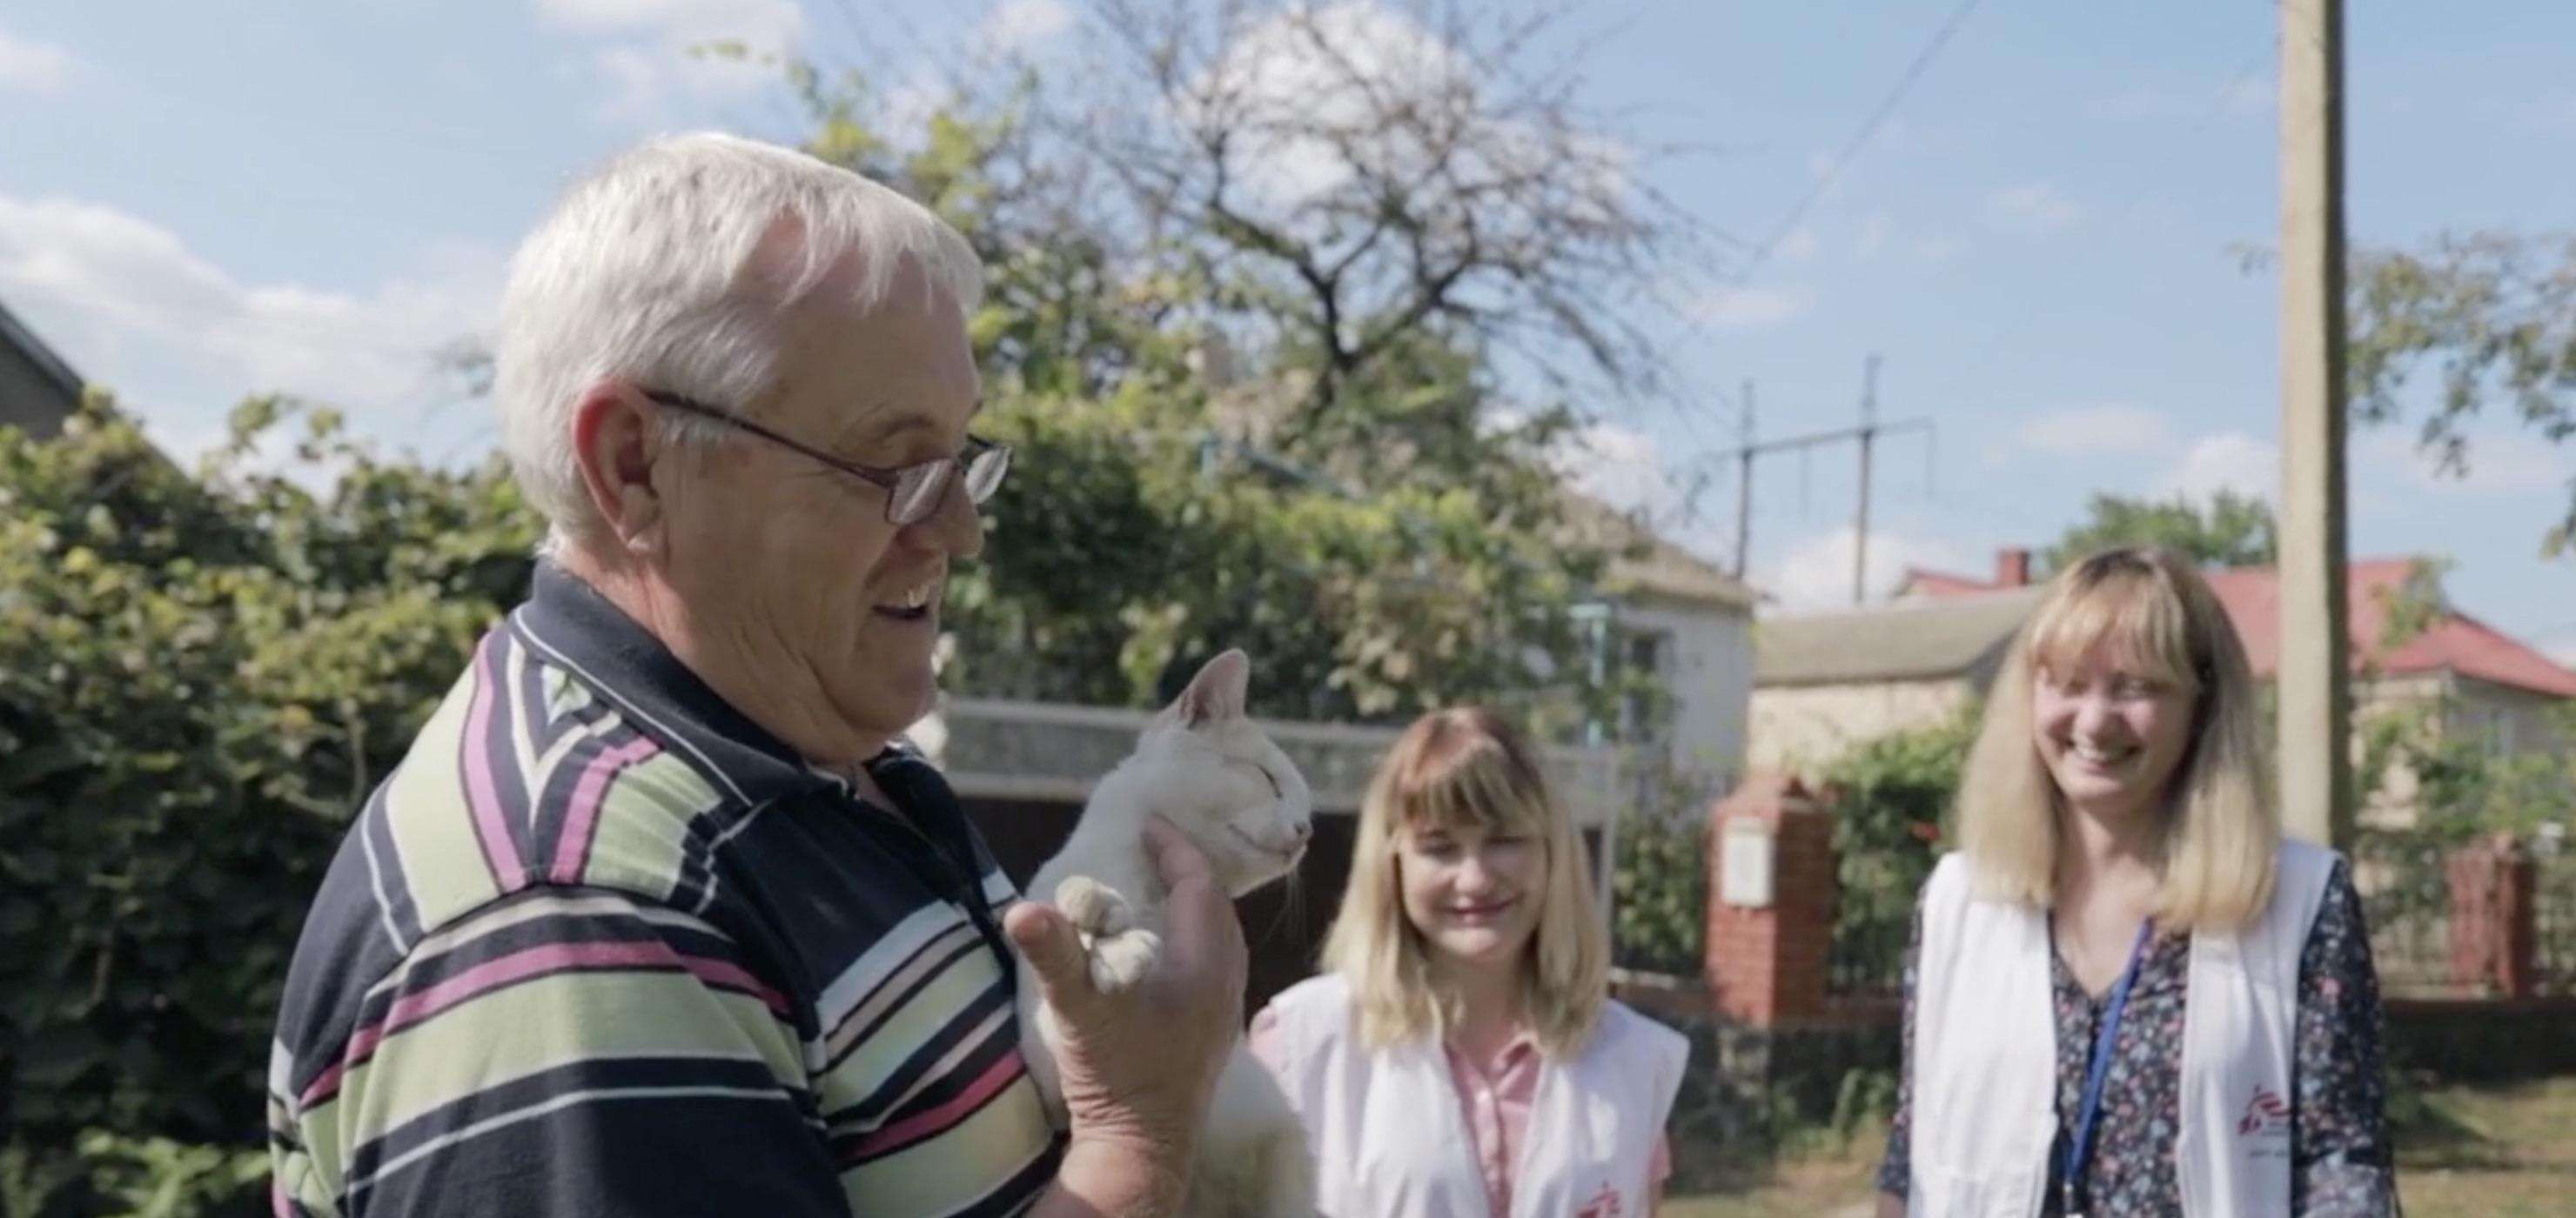 Older man holding a cat, smiling, surrounded by MSF staff